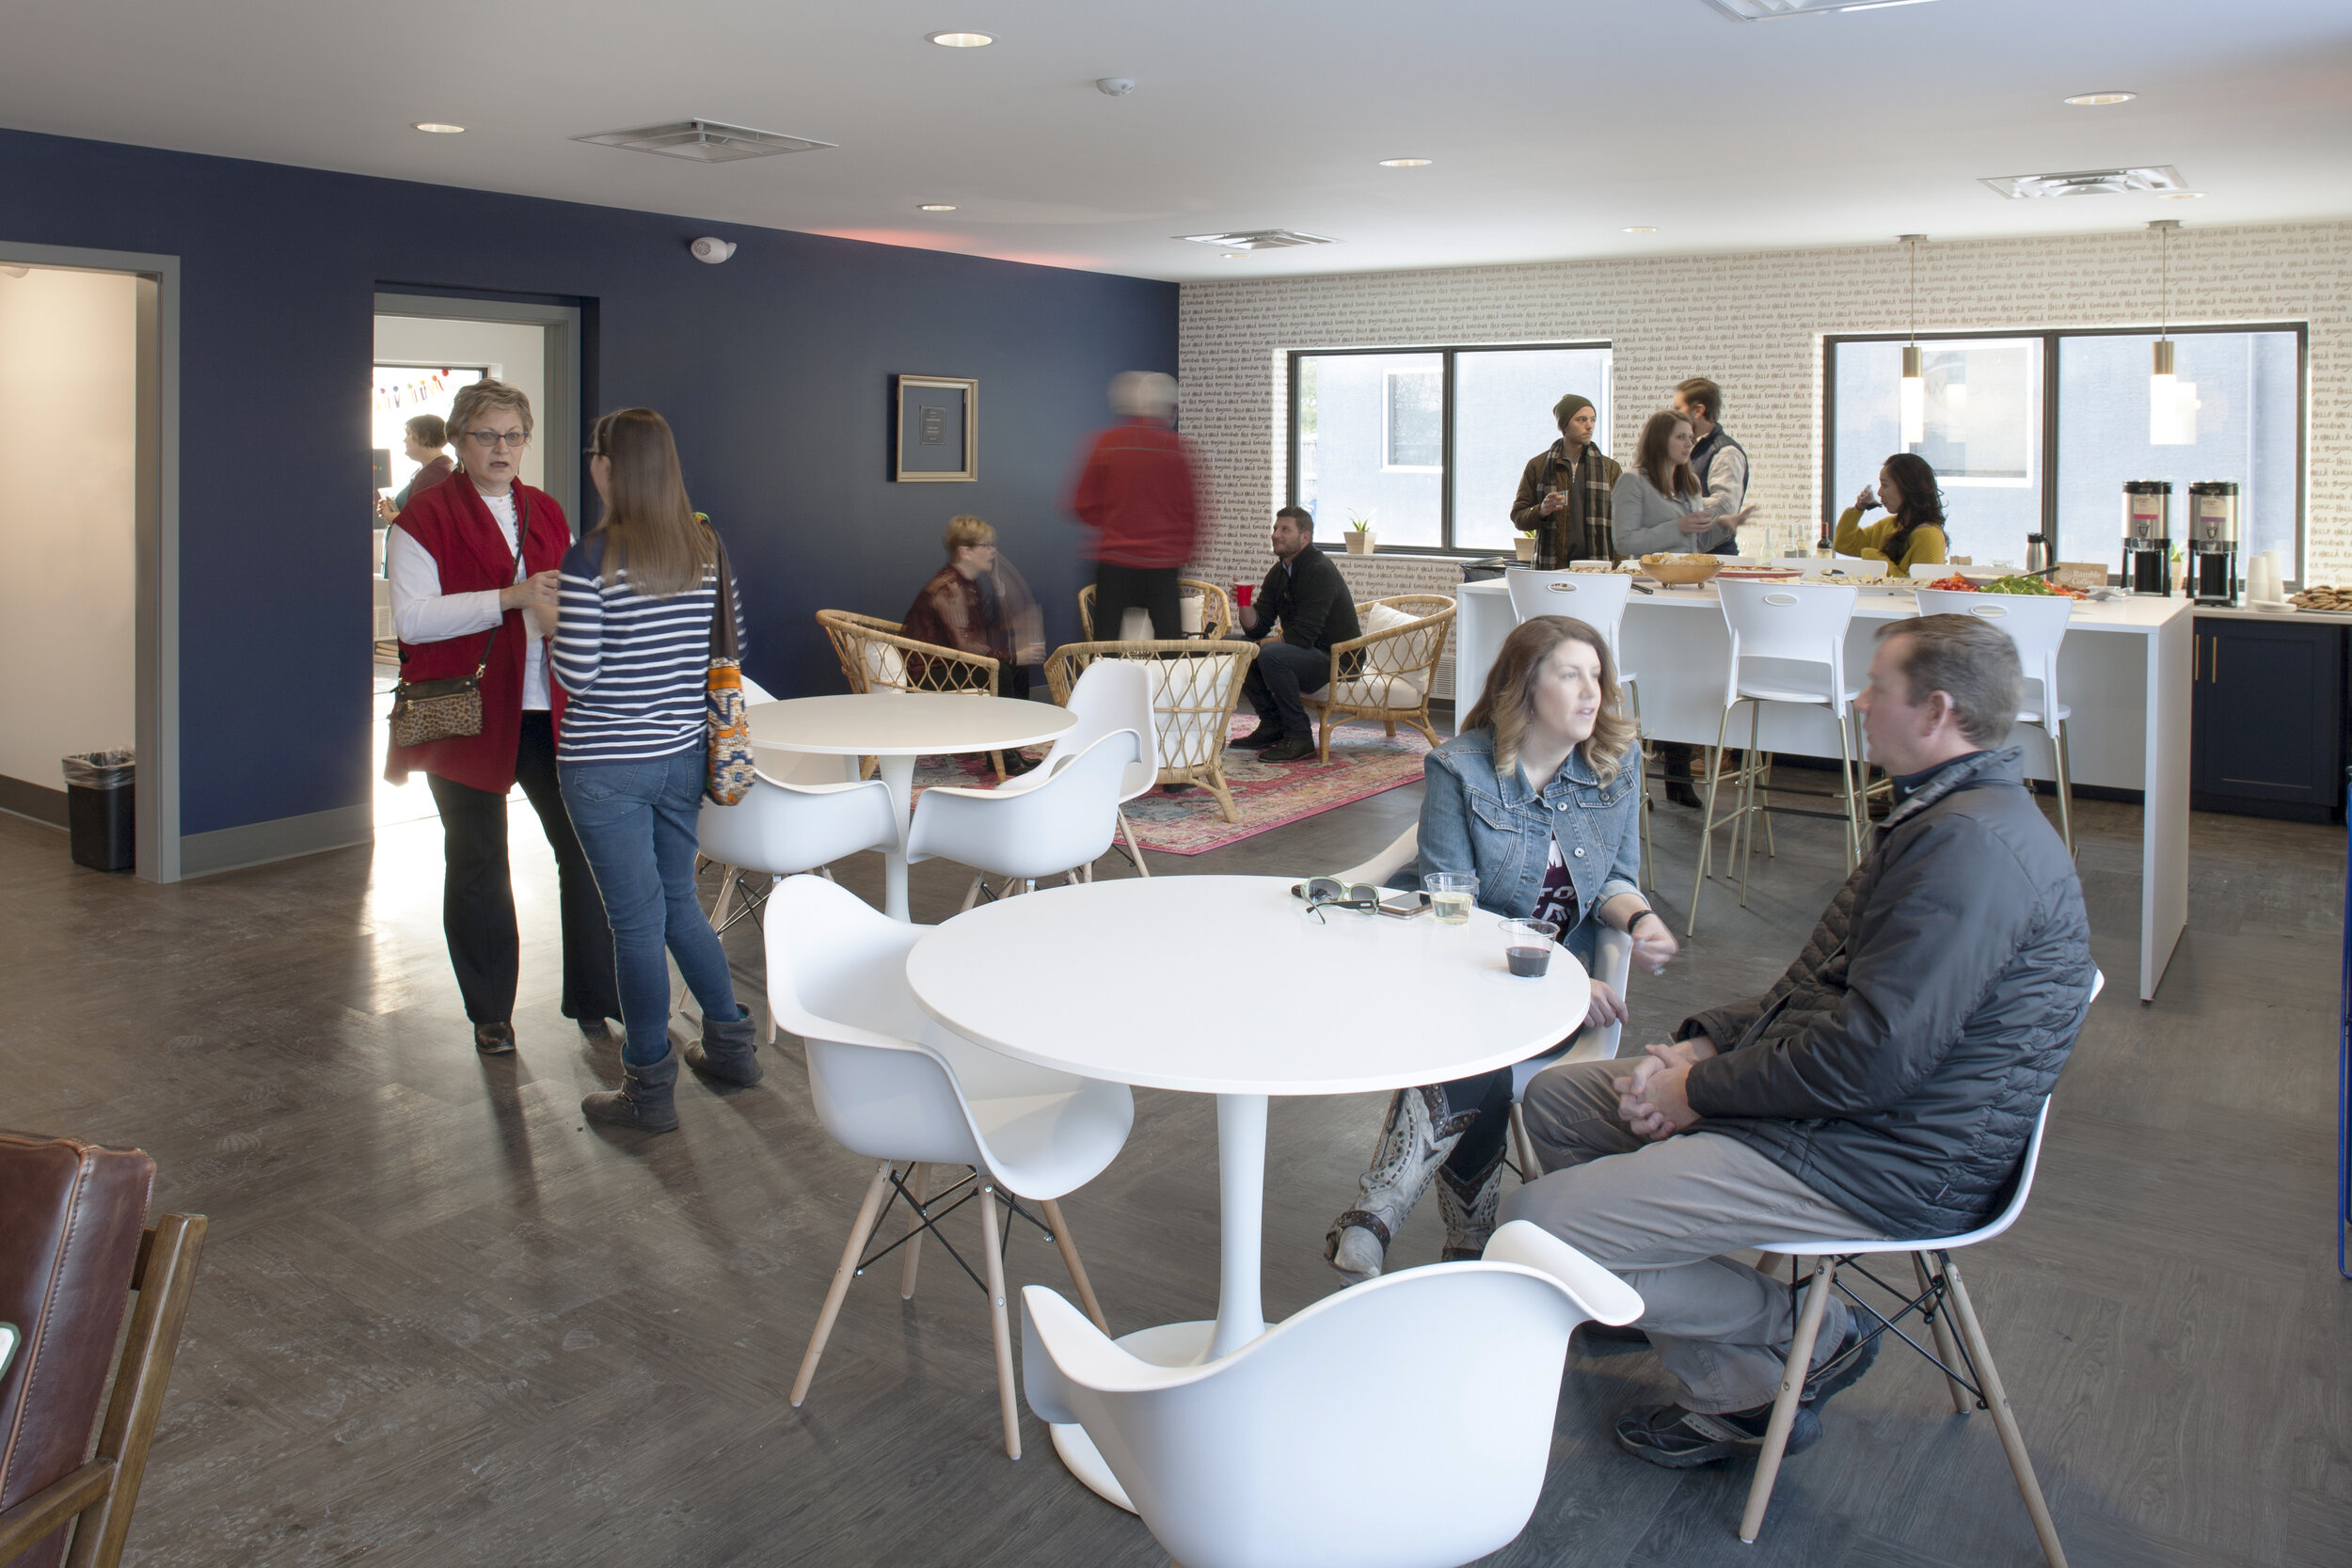 Meeting Rentals - Anyone can enjoy meeting and event space rentals at Haven Collective. With two conference rooms and two event space options on site, we’re sure you’ll find a space that fits your needs.